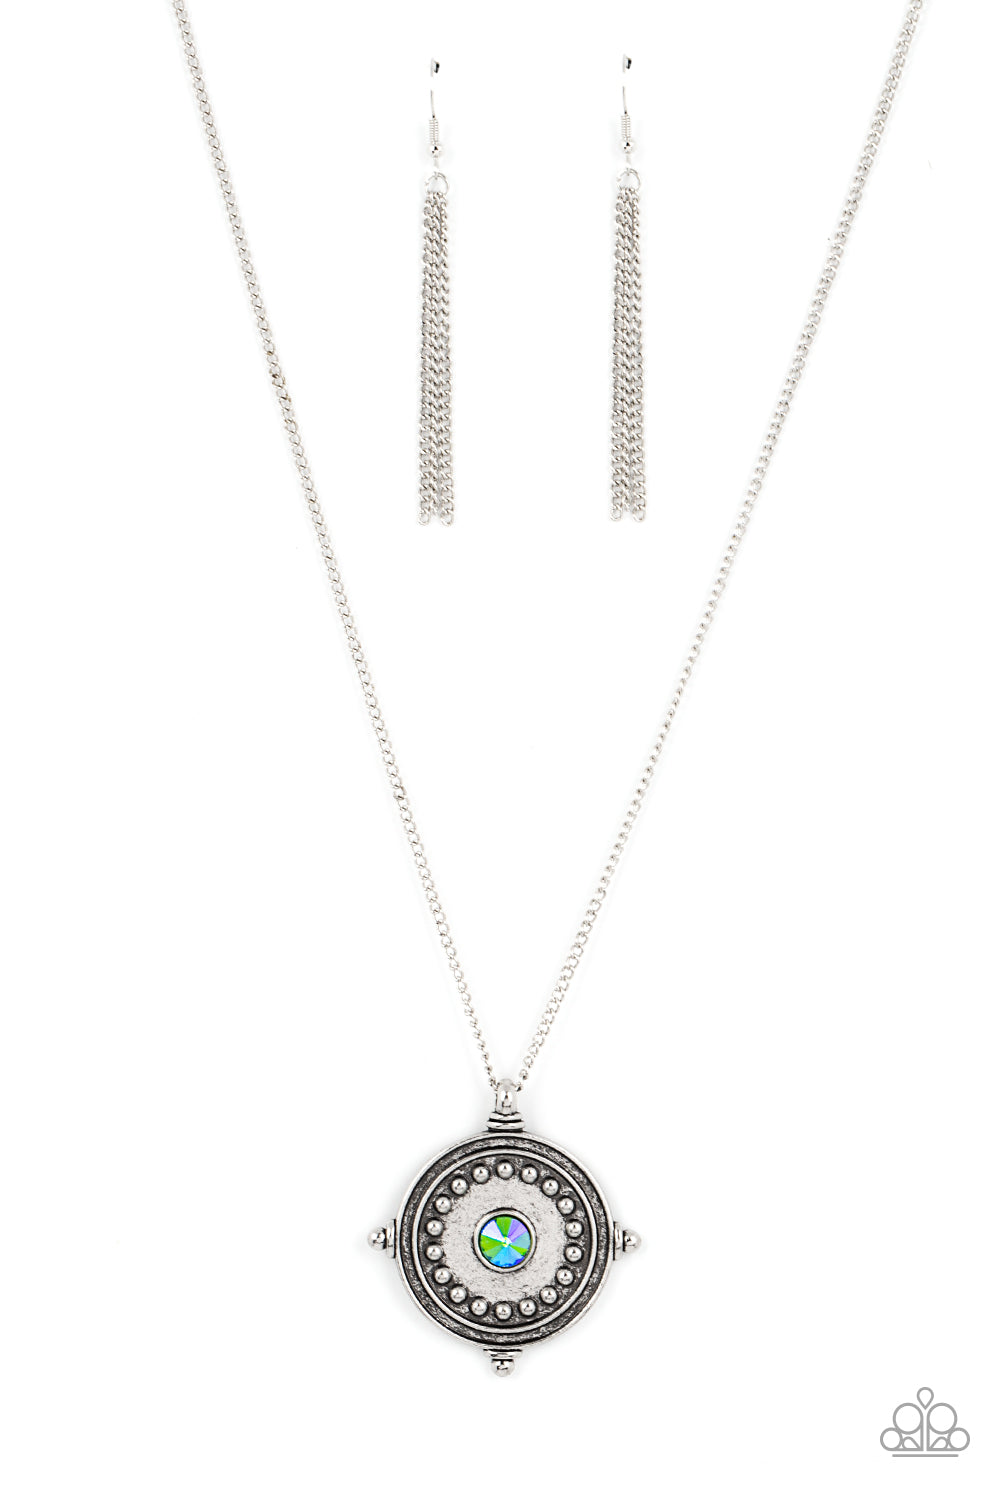 Compass Composure - Green Iridescent Rhinestone/Compass Inspired Pendant Paparazzi Necklace & matching earrings